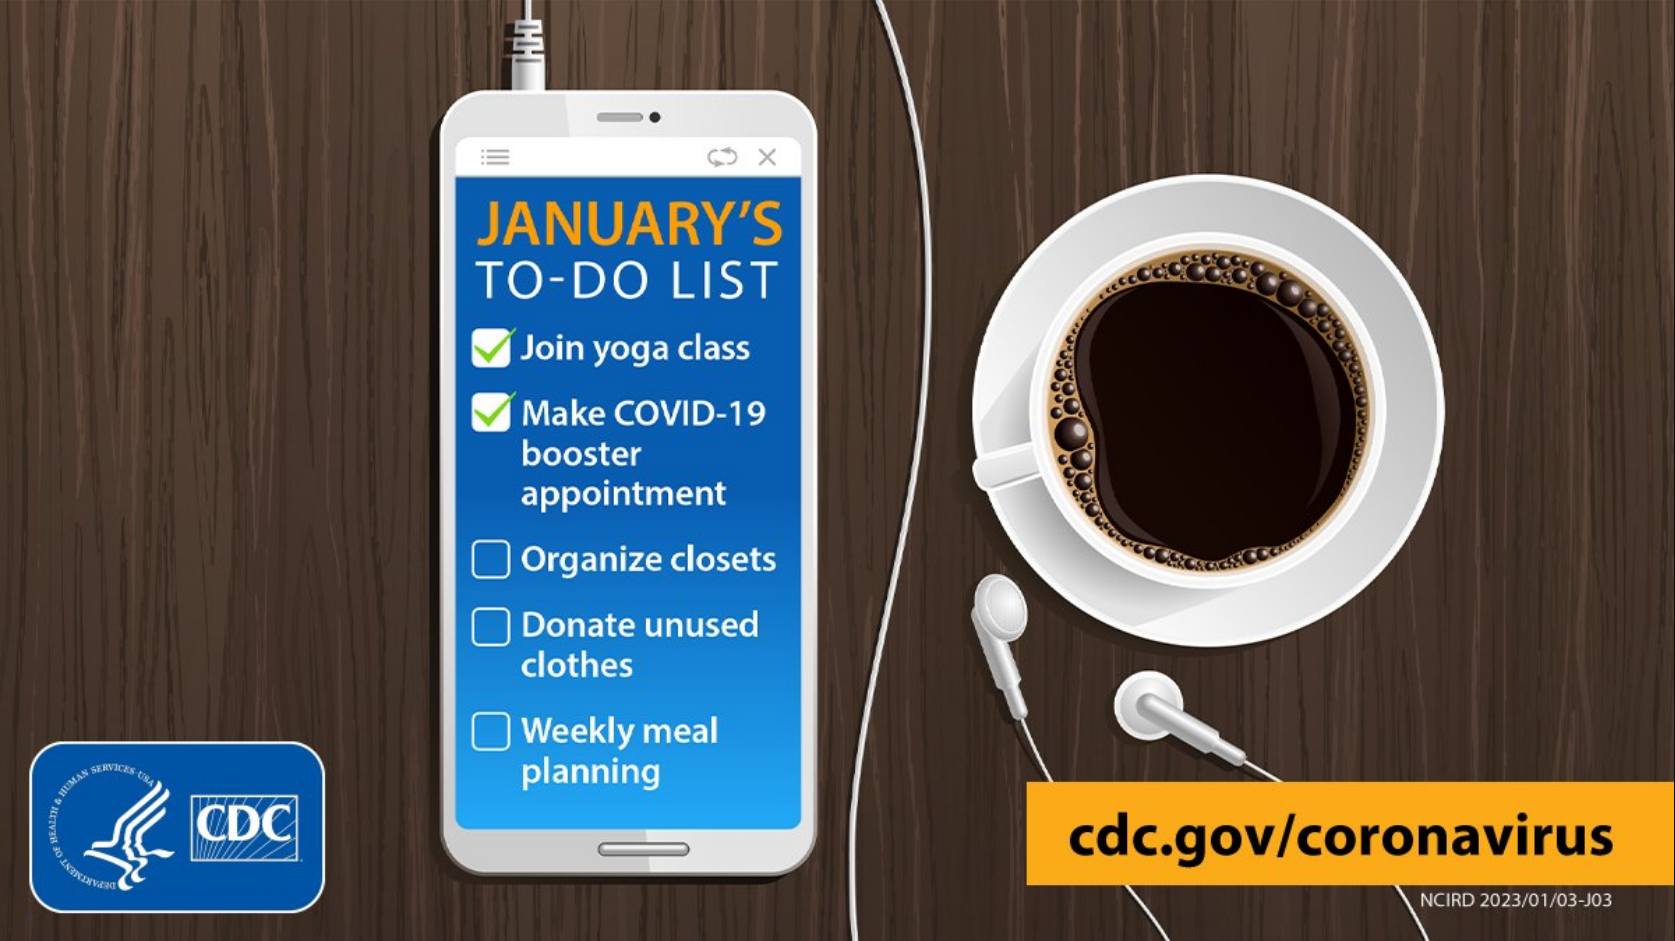 A to-do list for January appears on a smart phone next to a cup of coffee 